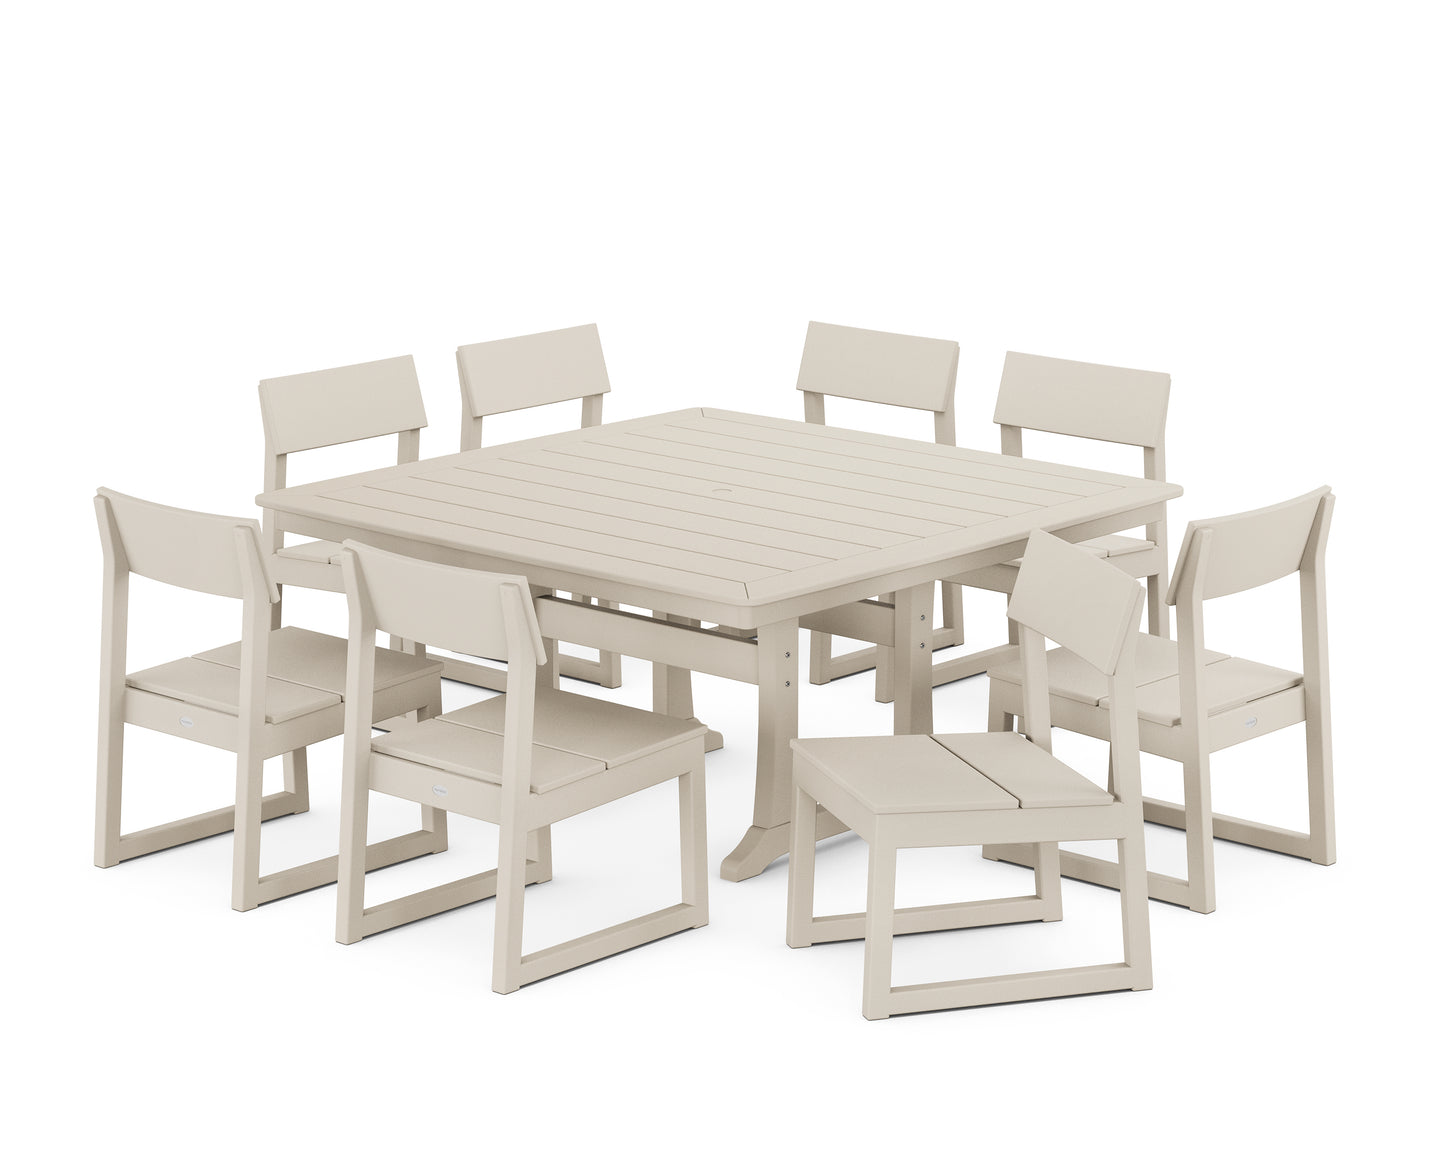 EDGE Side Chair 9-Piece Dining Set with Trestle Legs